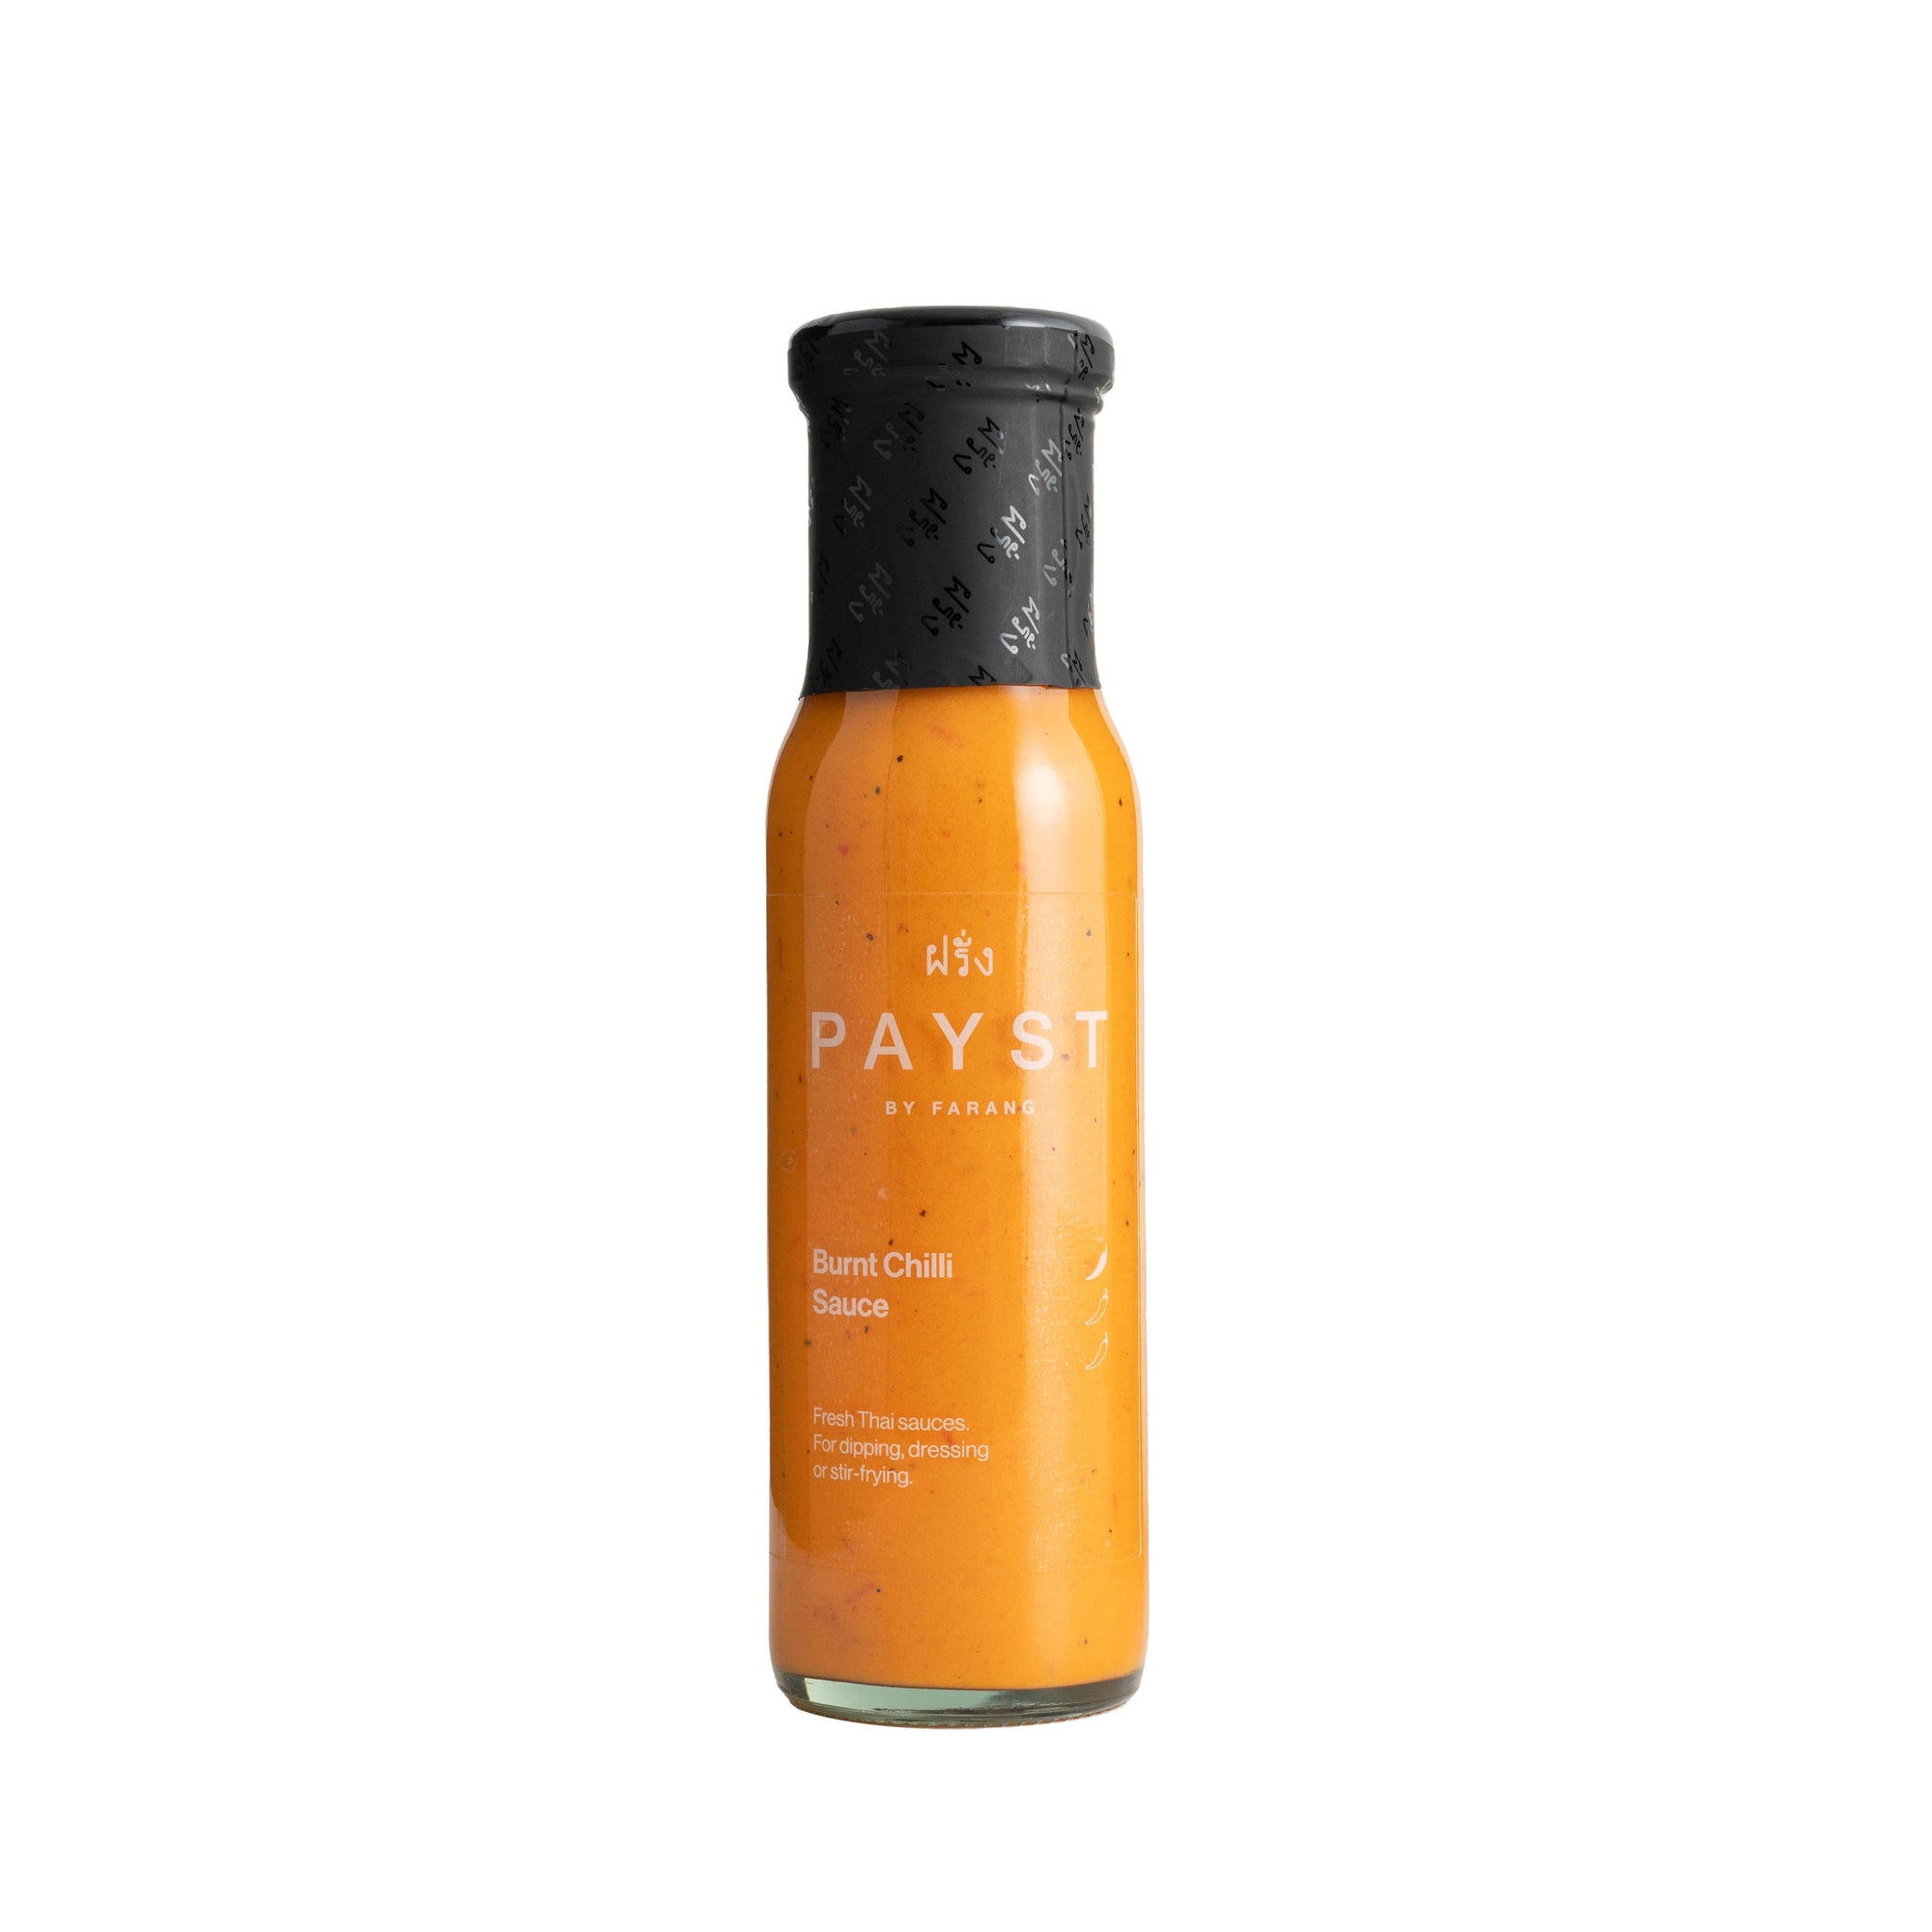 Payst Burnt Chilli Dipping Sauce (250ml)